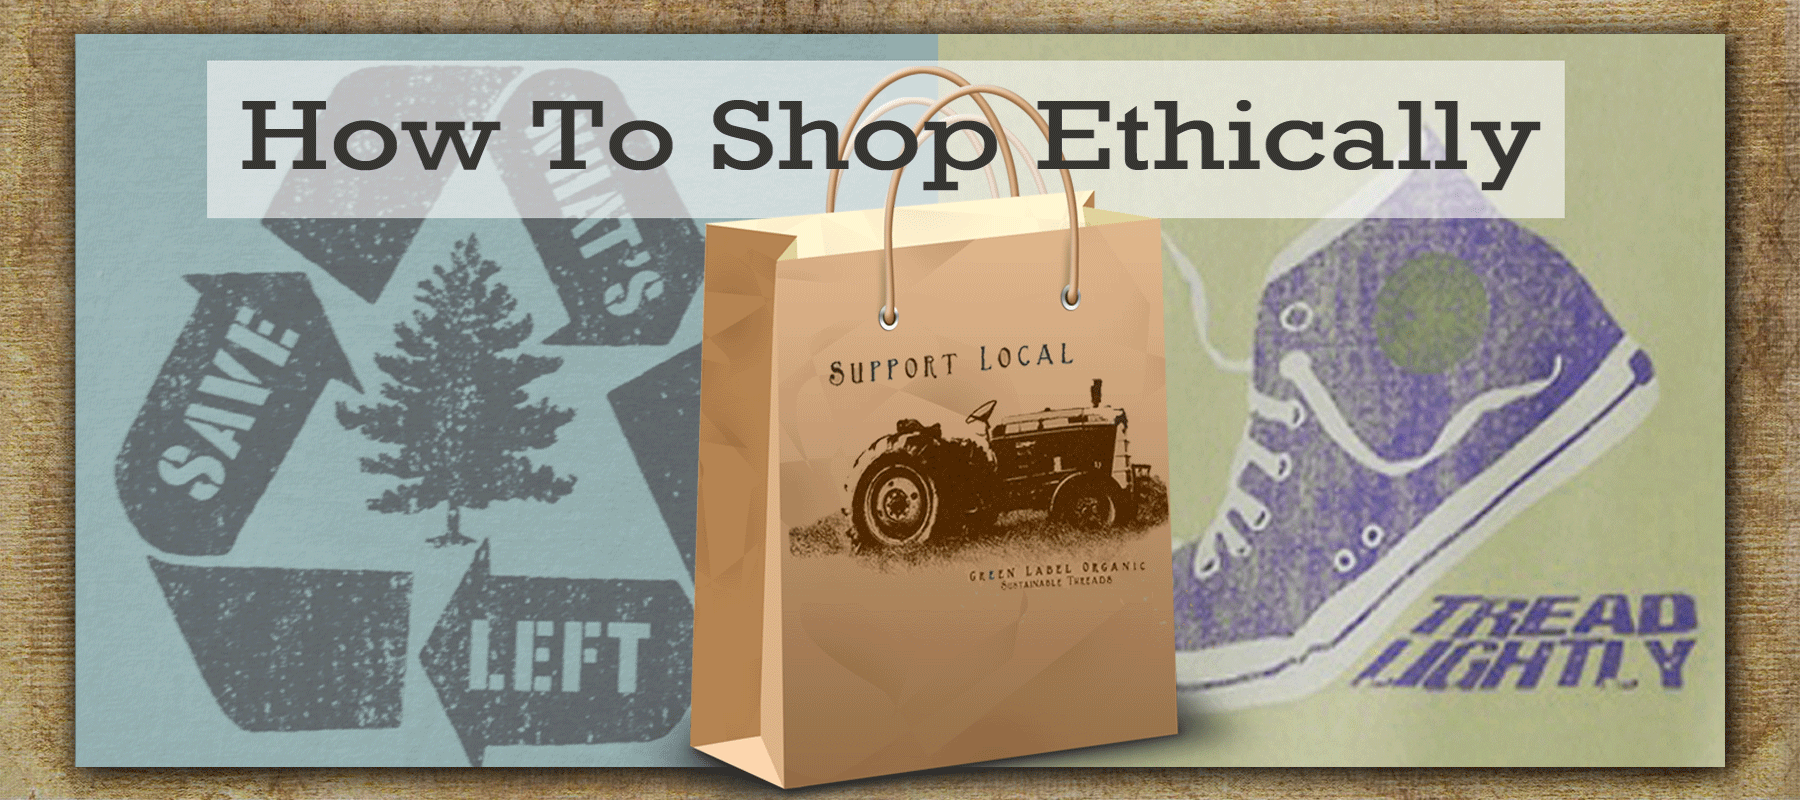 Green-Label-Organic-Provides-The-Top-3-Ways-To-Shop-Ethically